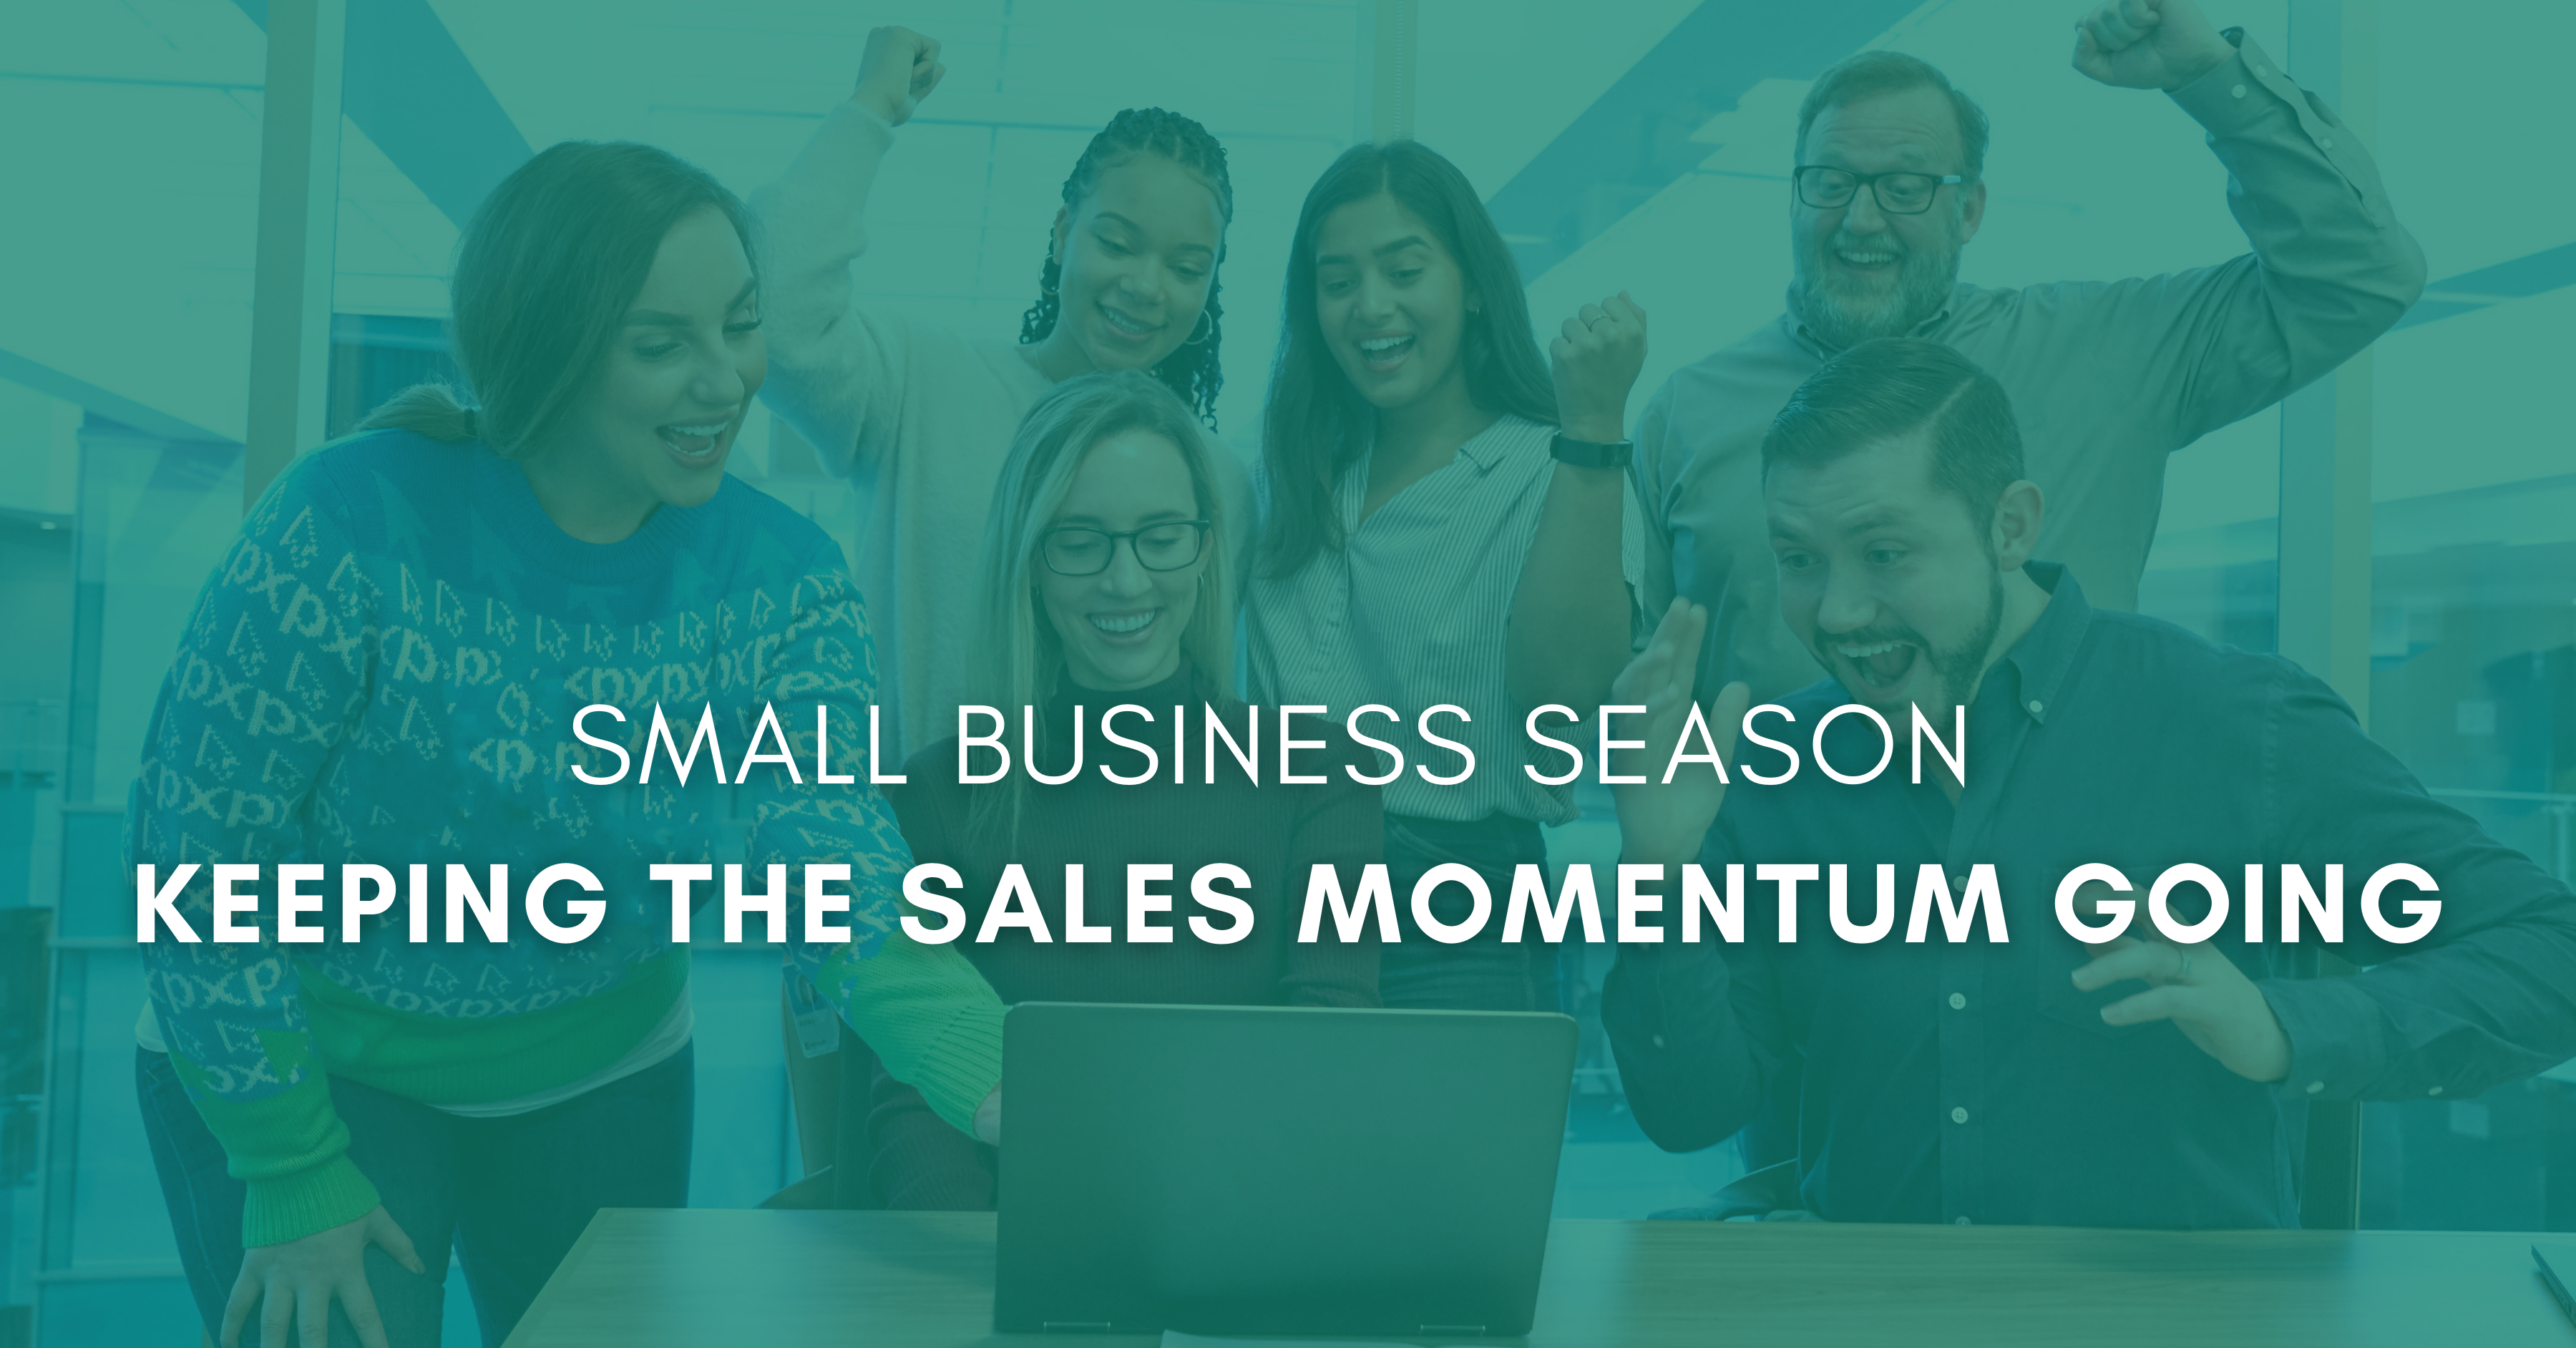 Small Business Season: keeping the sales momentum going